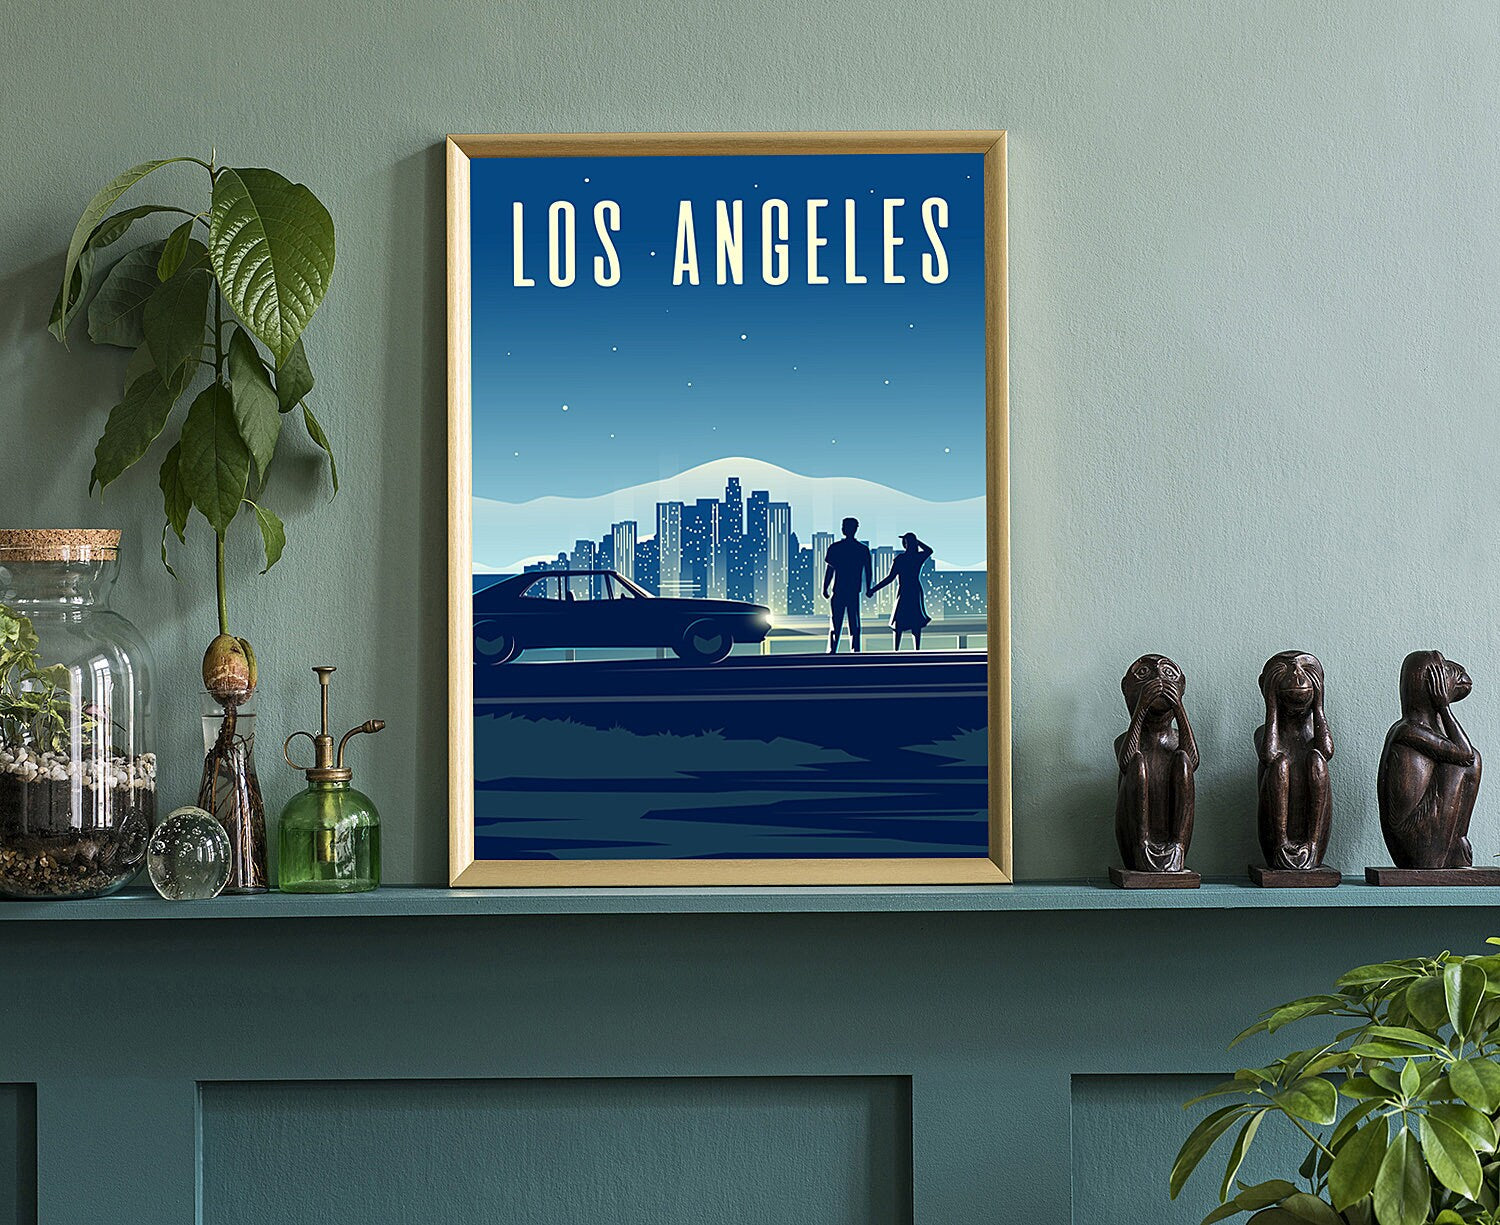 Retro Style Travel Poster, Los Angeles Vintage Rustic Poster Print, Home Wall Art, Office Wall Decors, Poster, Los Angeles, State Map Poster